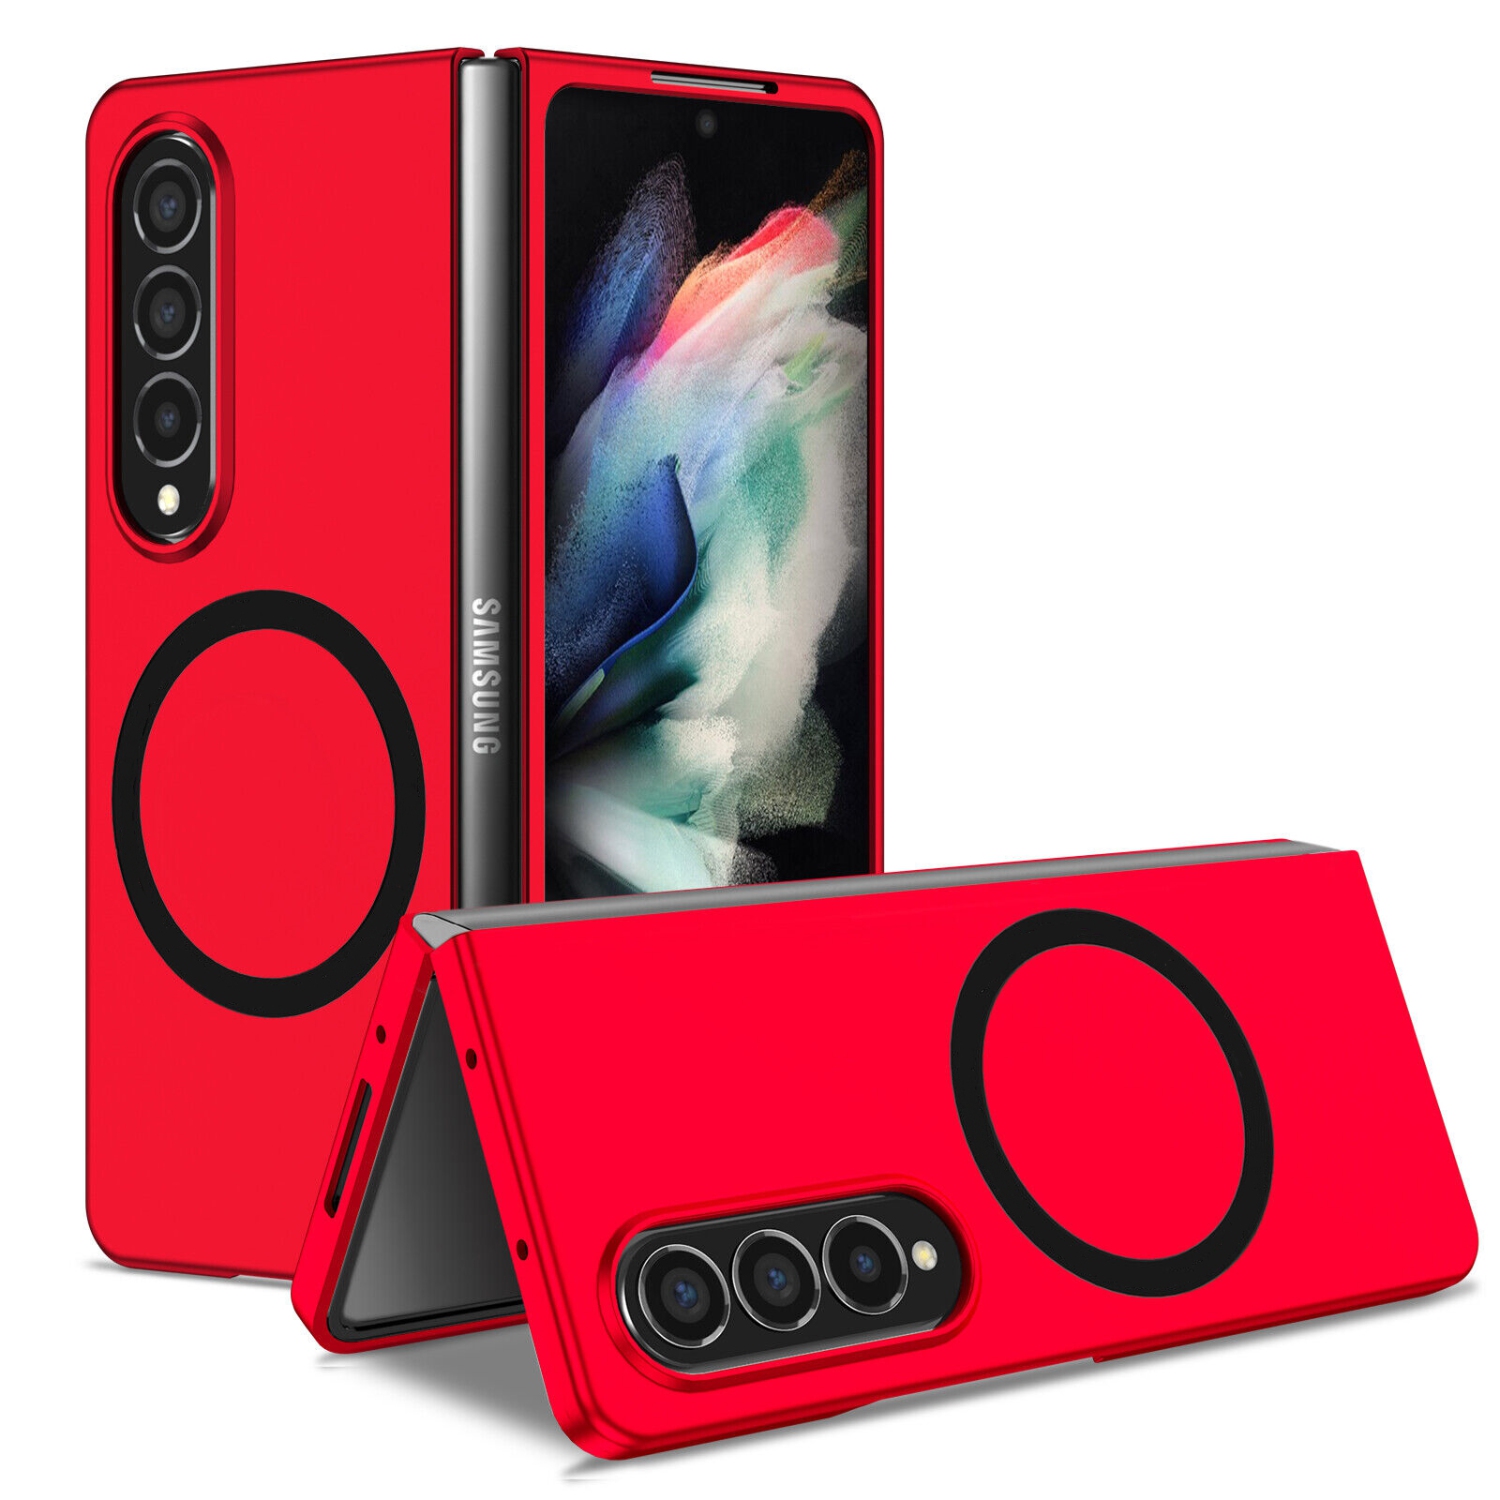 【CSmart】 Hybrid Magnetic Wireless Charging MagSafe Case Back Cover for Samsung Galaxy Z Fold 3, Red